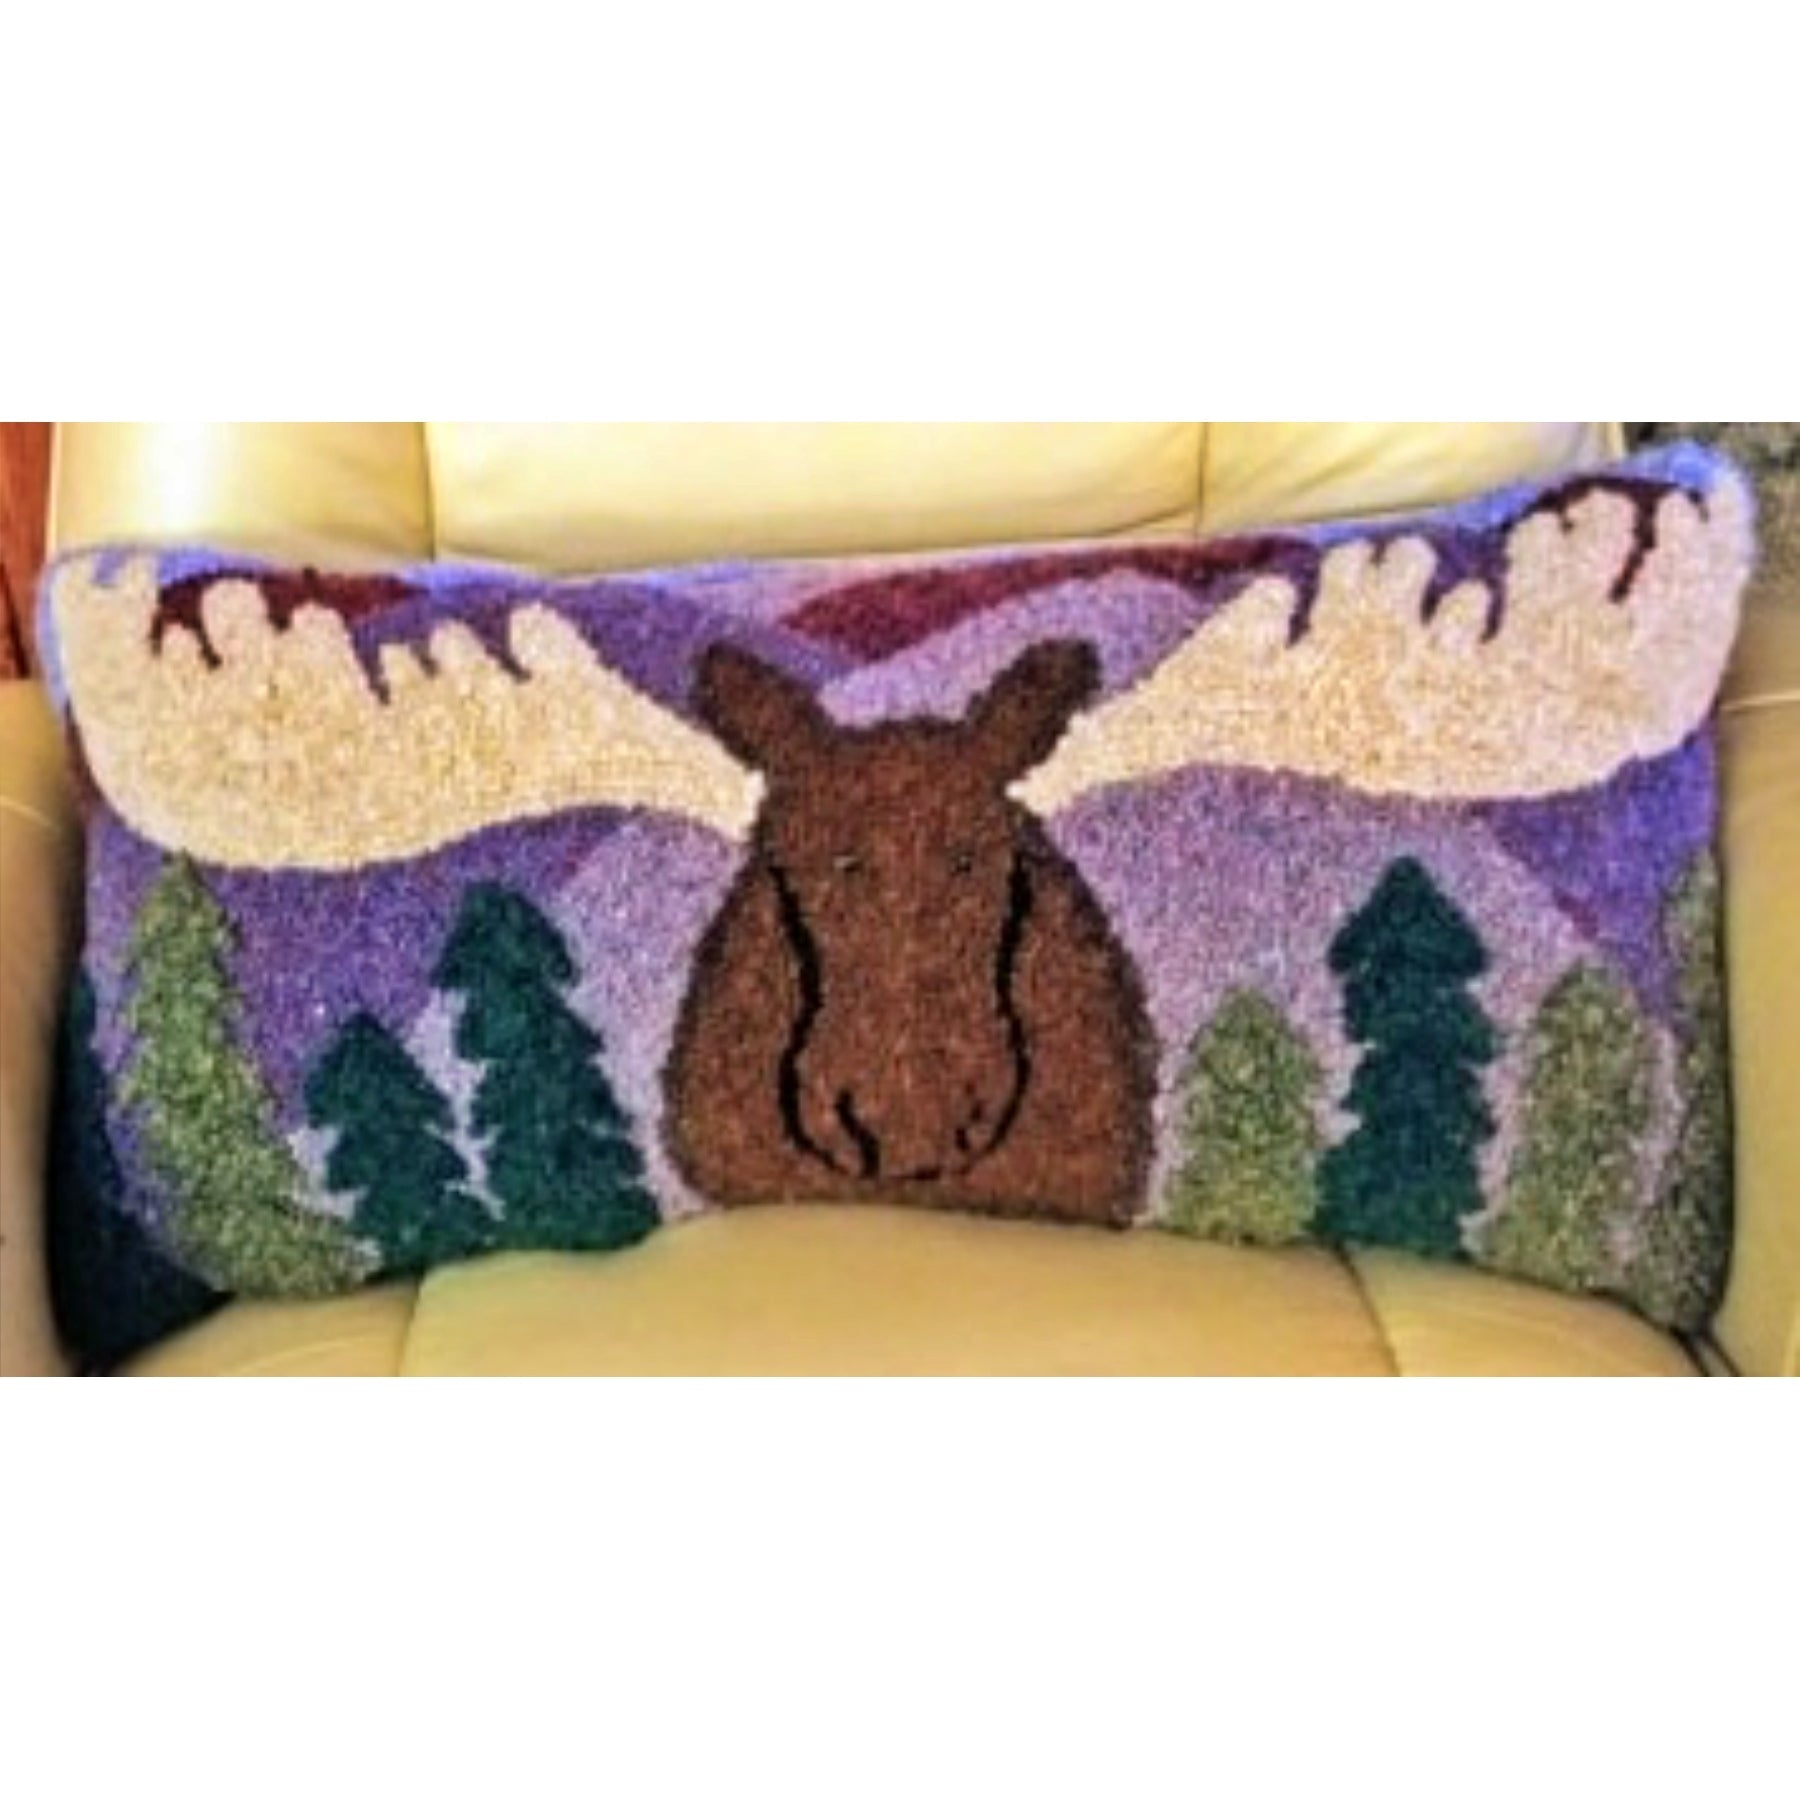 Moose on the Loose, rug hooked by Wendy Briggs Morin